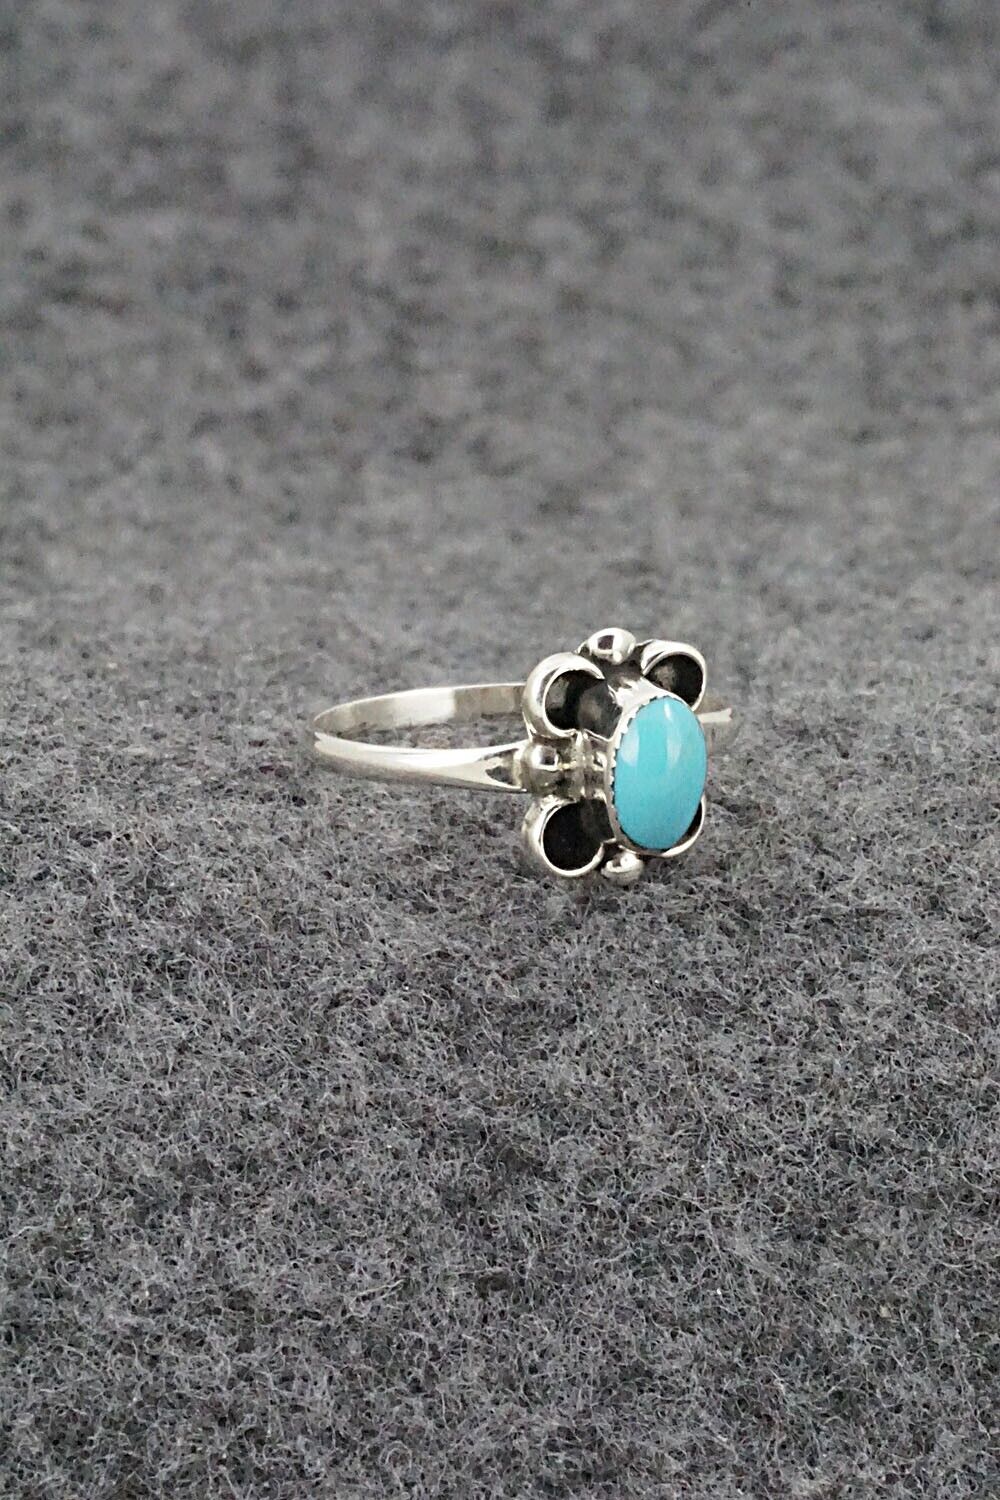 Turquoise & Sterling Silver Ring - Cora Cachini - Size 5.5